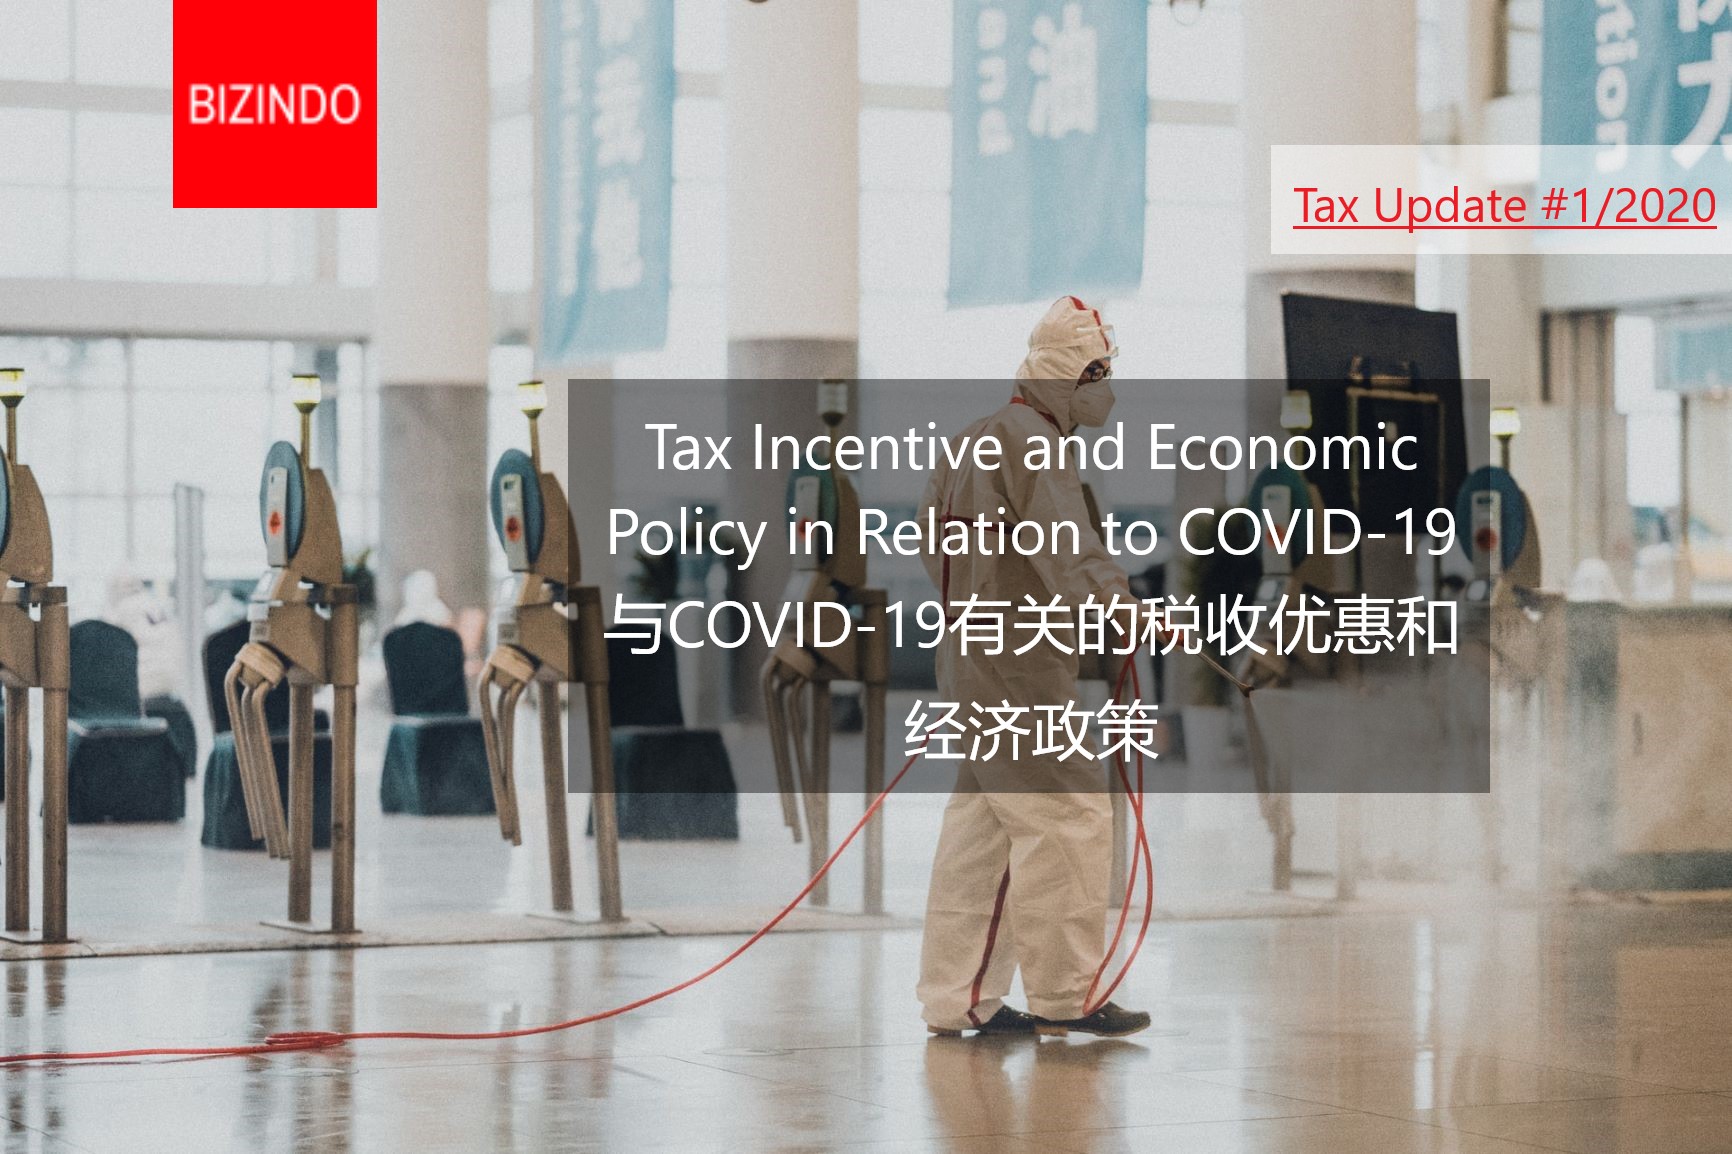 You are currently viewing Indonesia Tax Incentive and Economic Policy in Relation to COVID-19